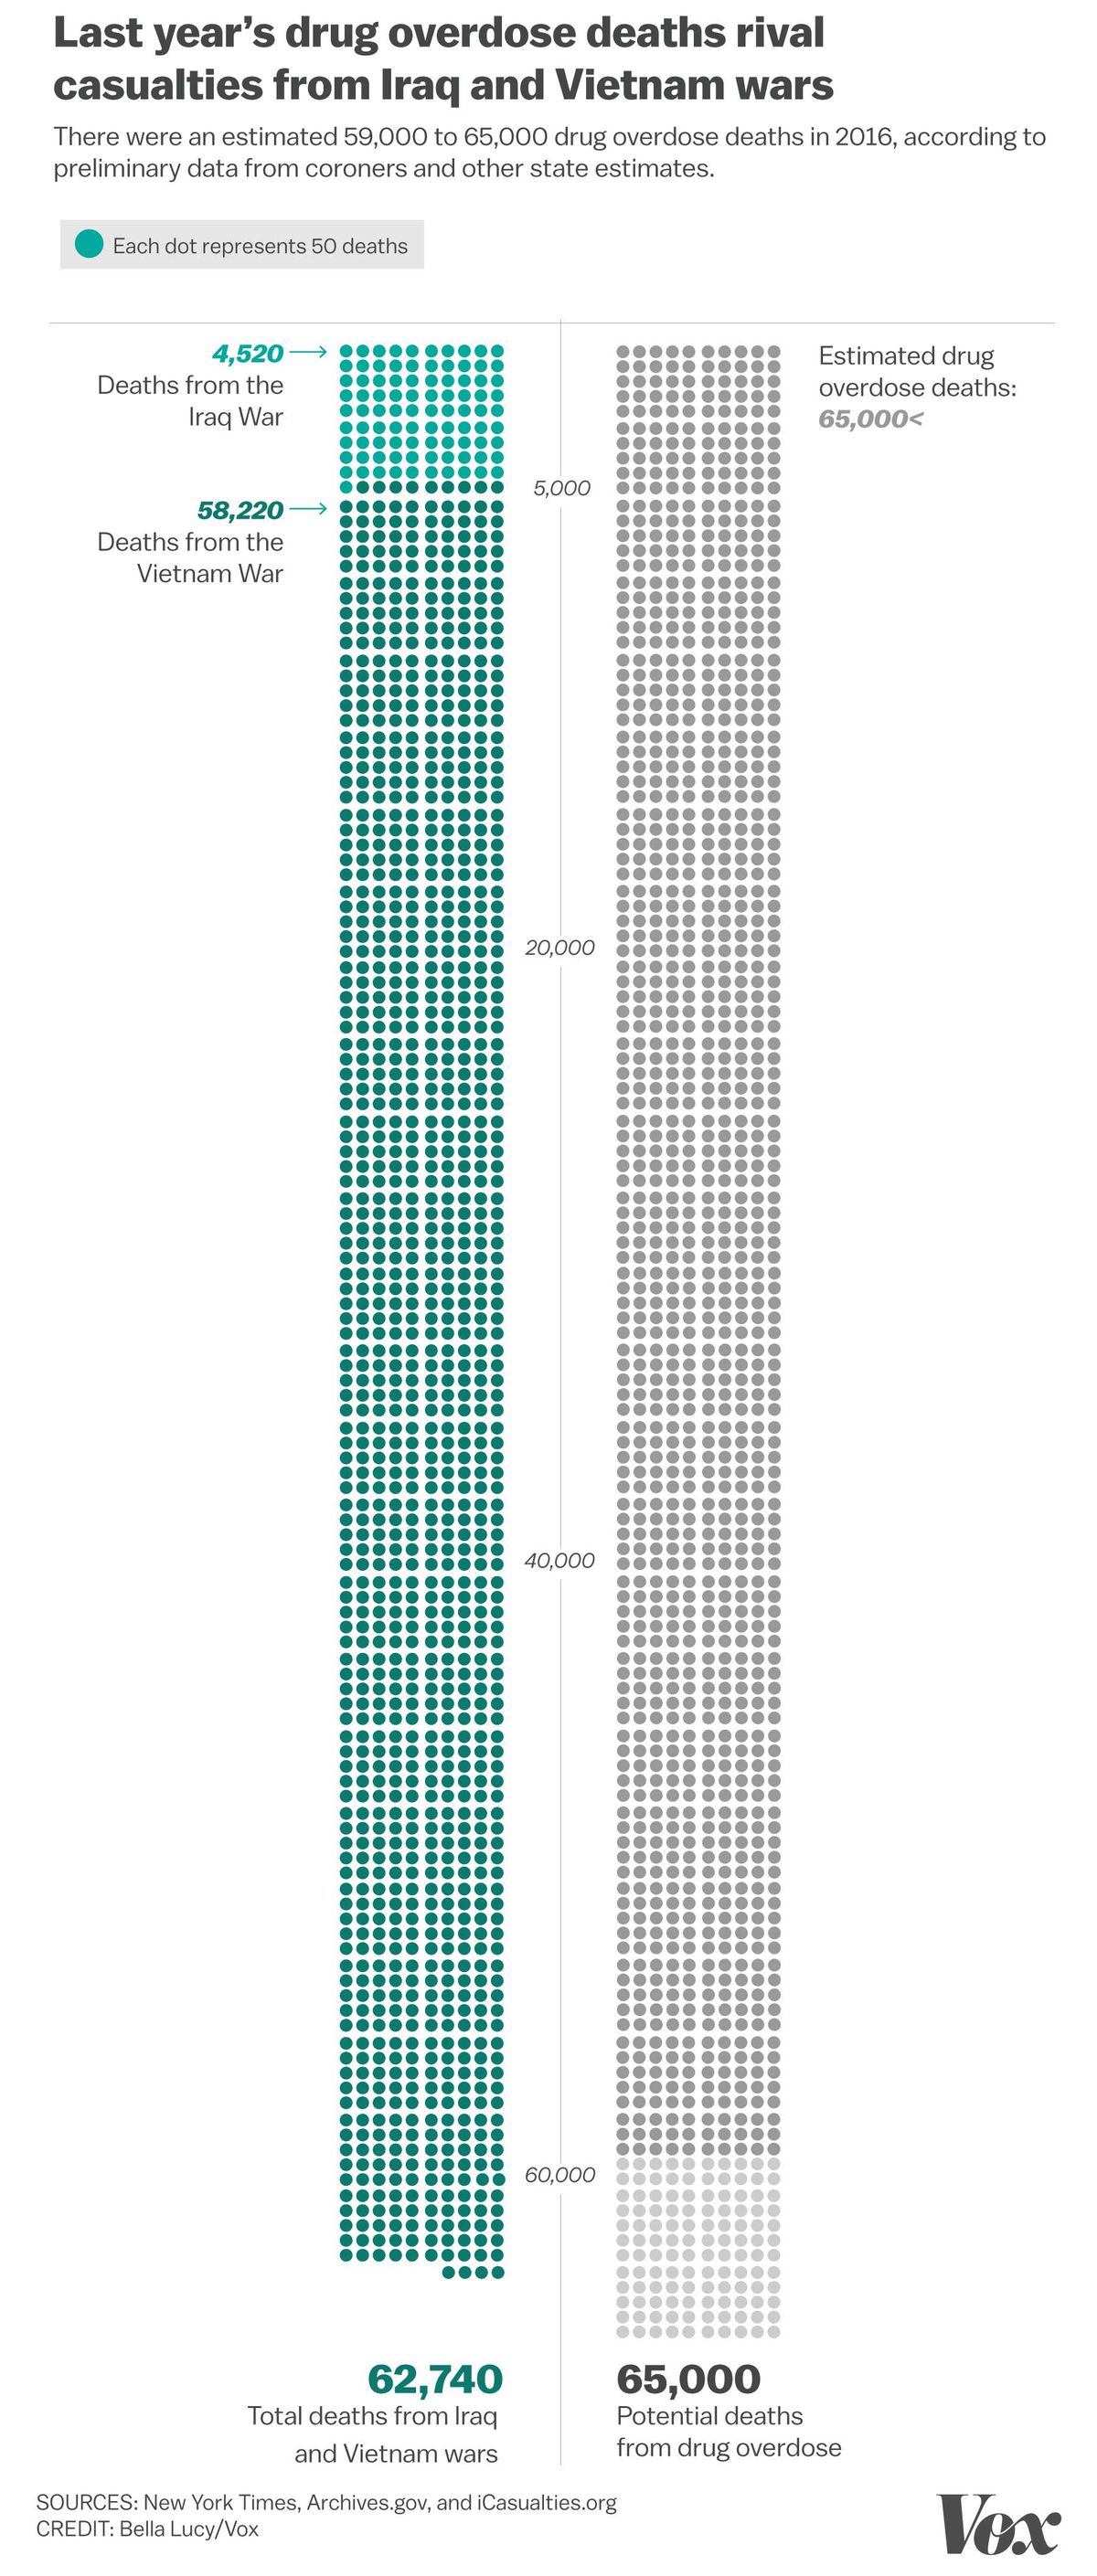 A chart of deaths from drug overdoses and deaths from the wars in Iraq and Vietnam.